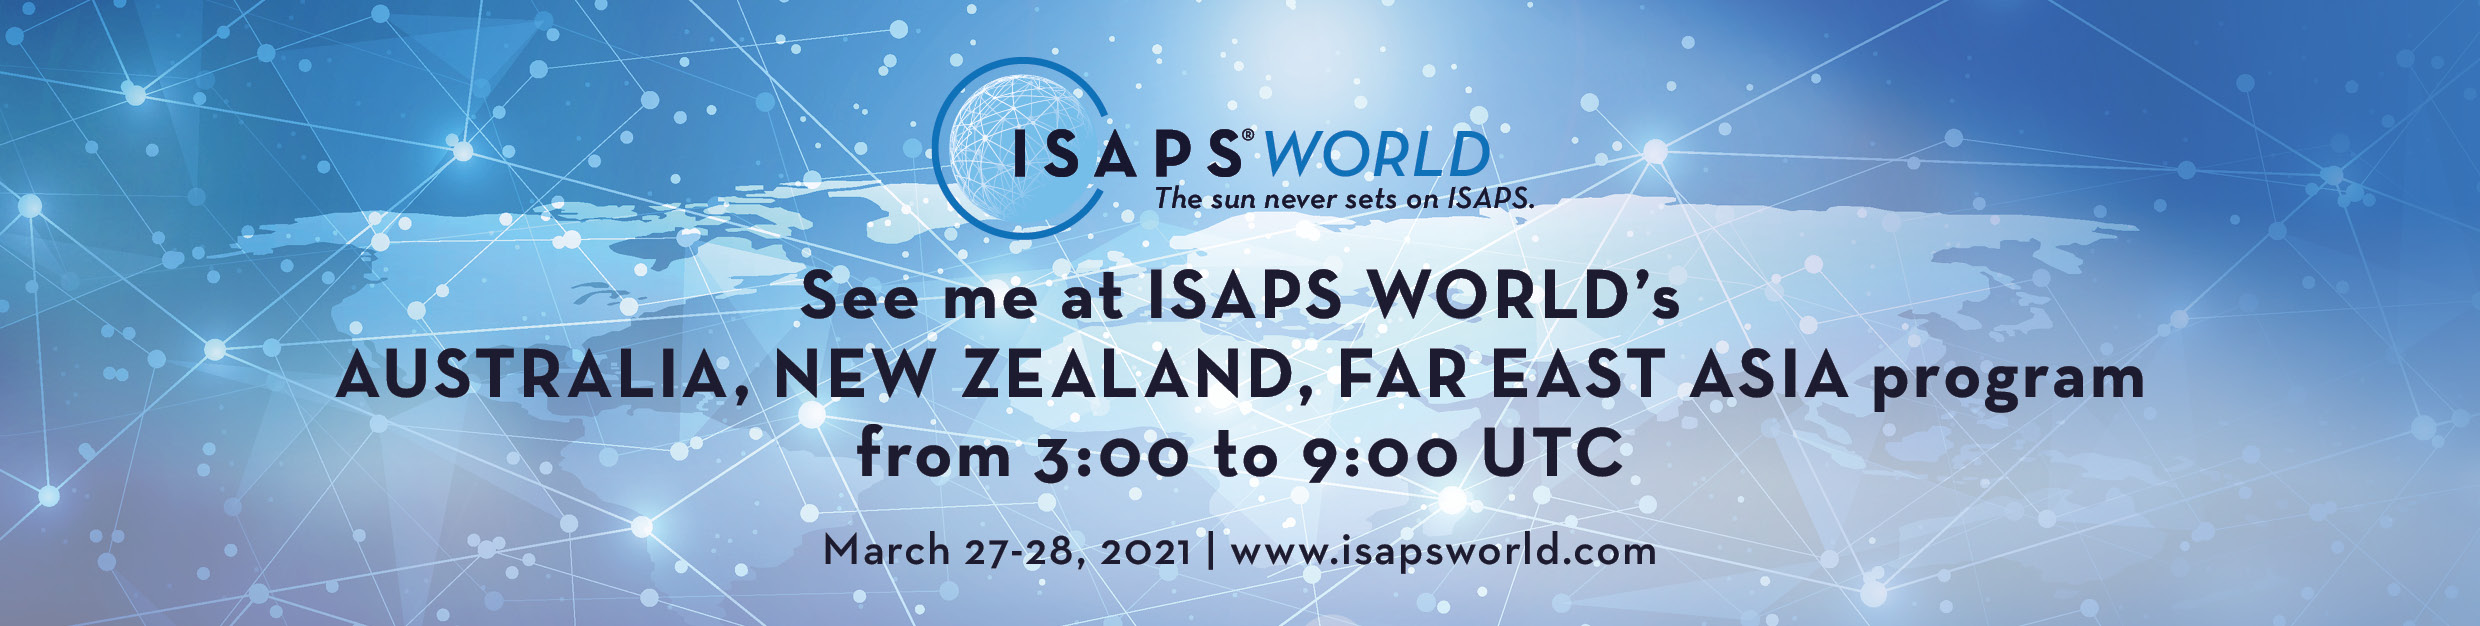 See me at ISAPS World's Program March 27-28, 2021